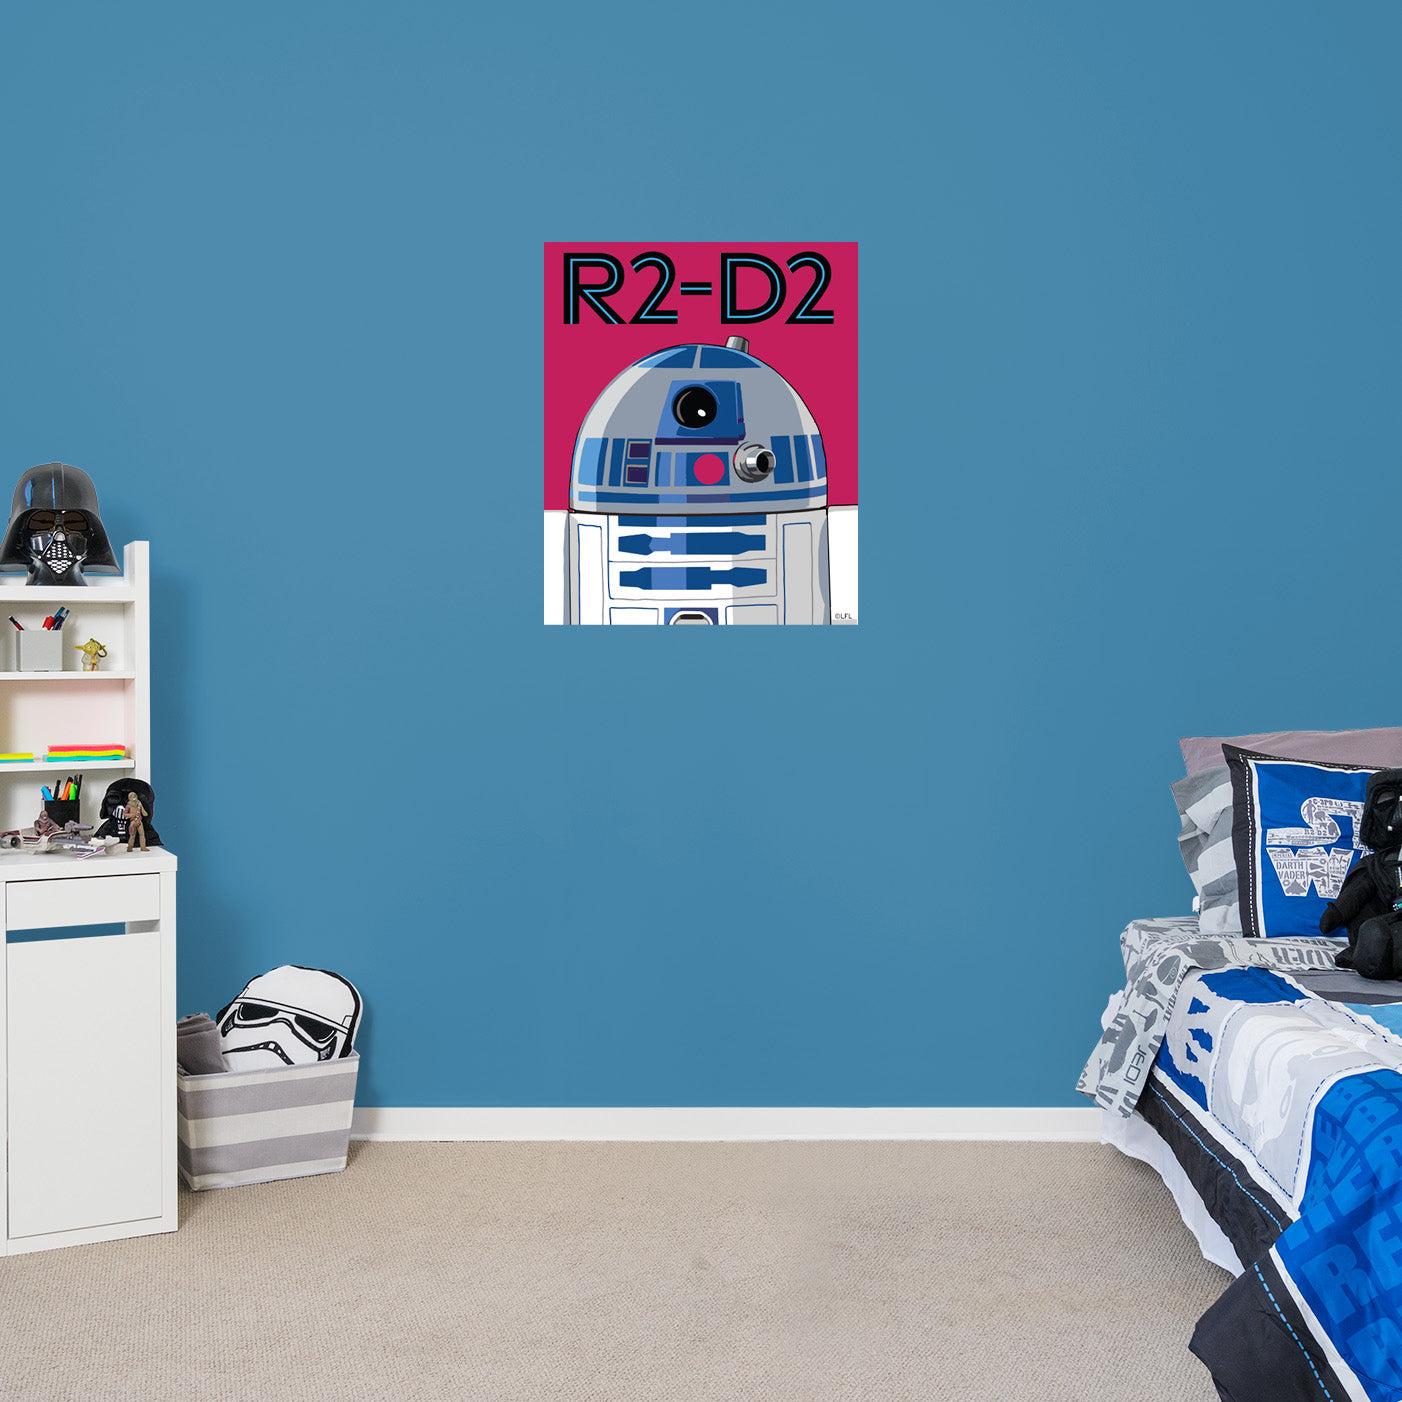 R2-D2 Pop Art Poster - Officially Licensed Star Wars Removable Adhesive Decal